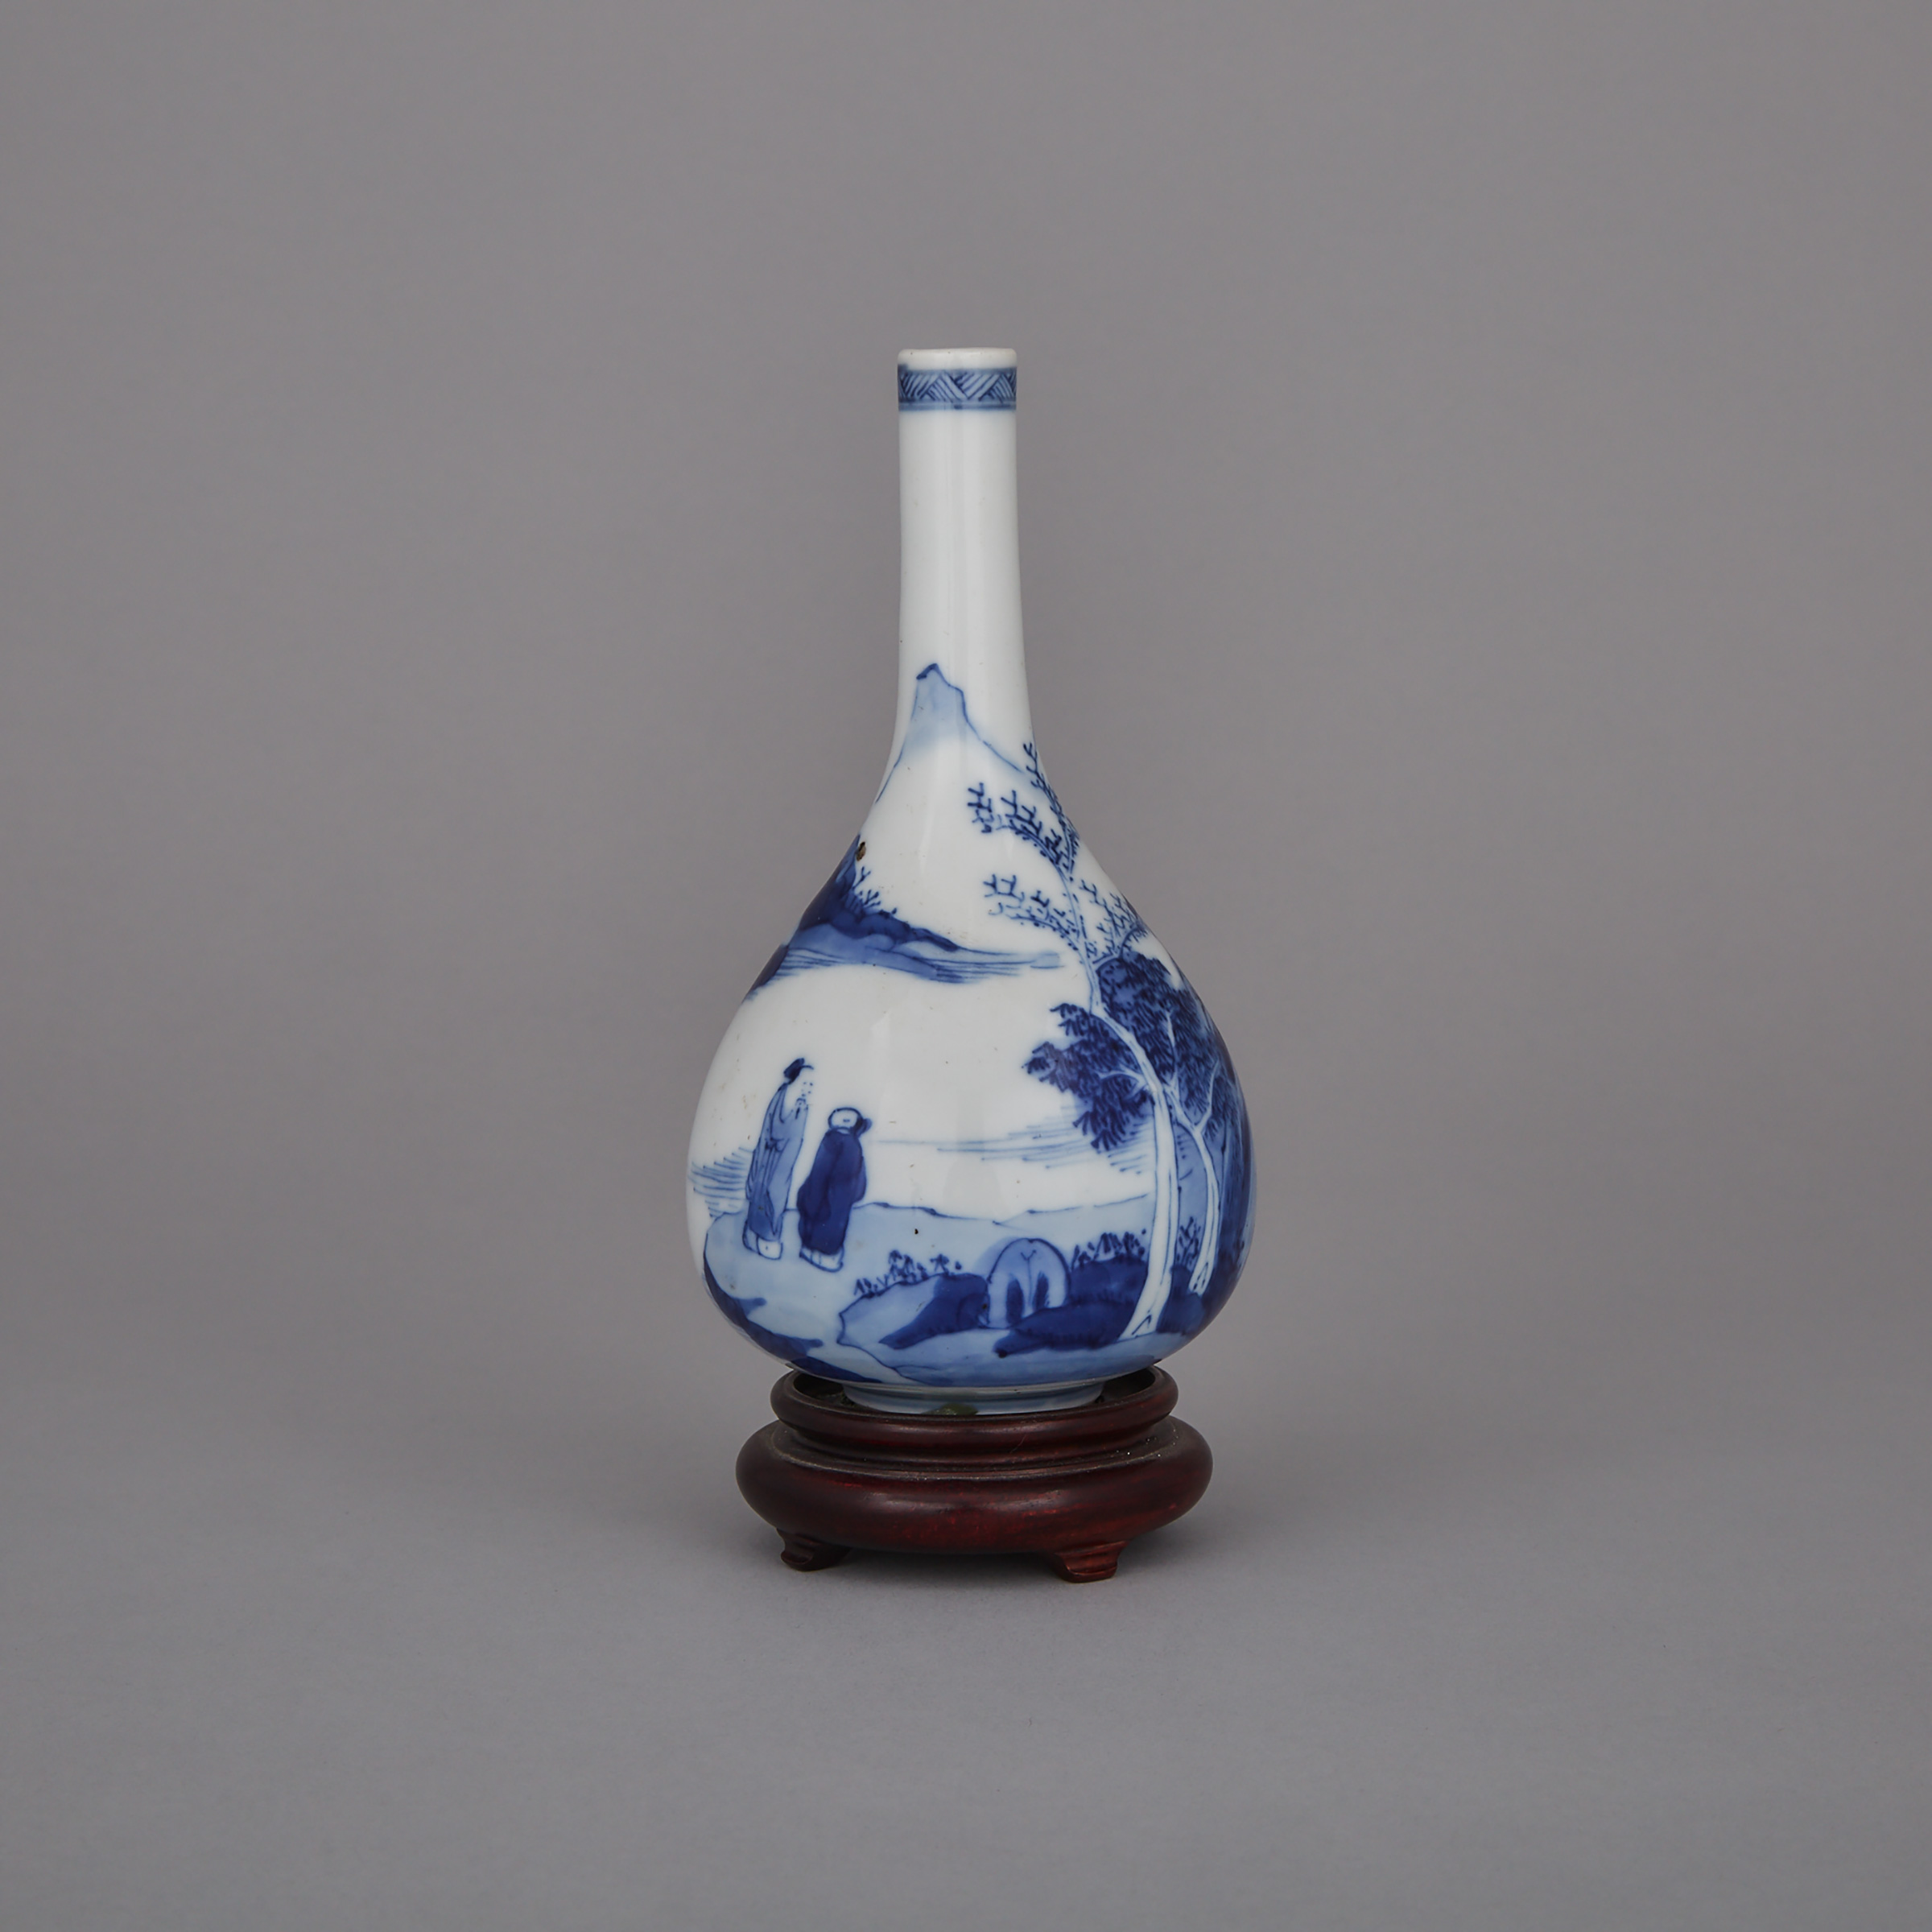 A Blue and White Bottle Vase, Transitional Period, 17th Century